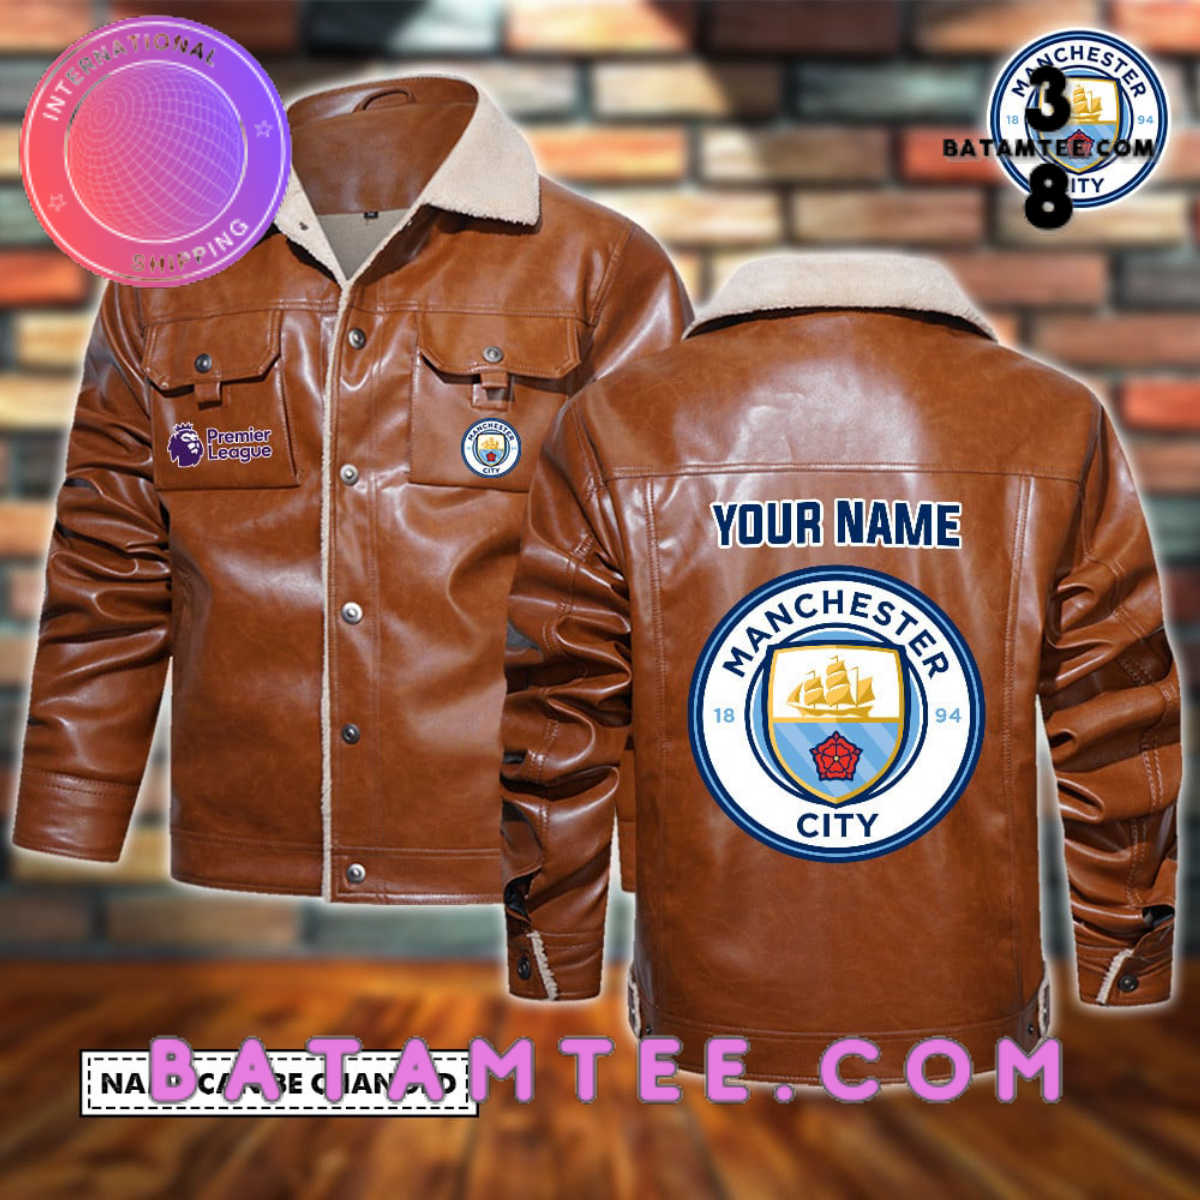 Personalized Leather jacket for Manchester City FC fans-Limited Edition's Overview - Batamtee Shop - Threads & Totes: Your Style Destination